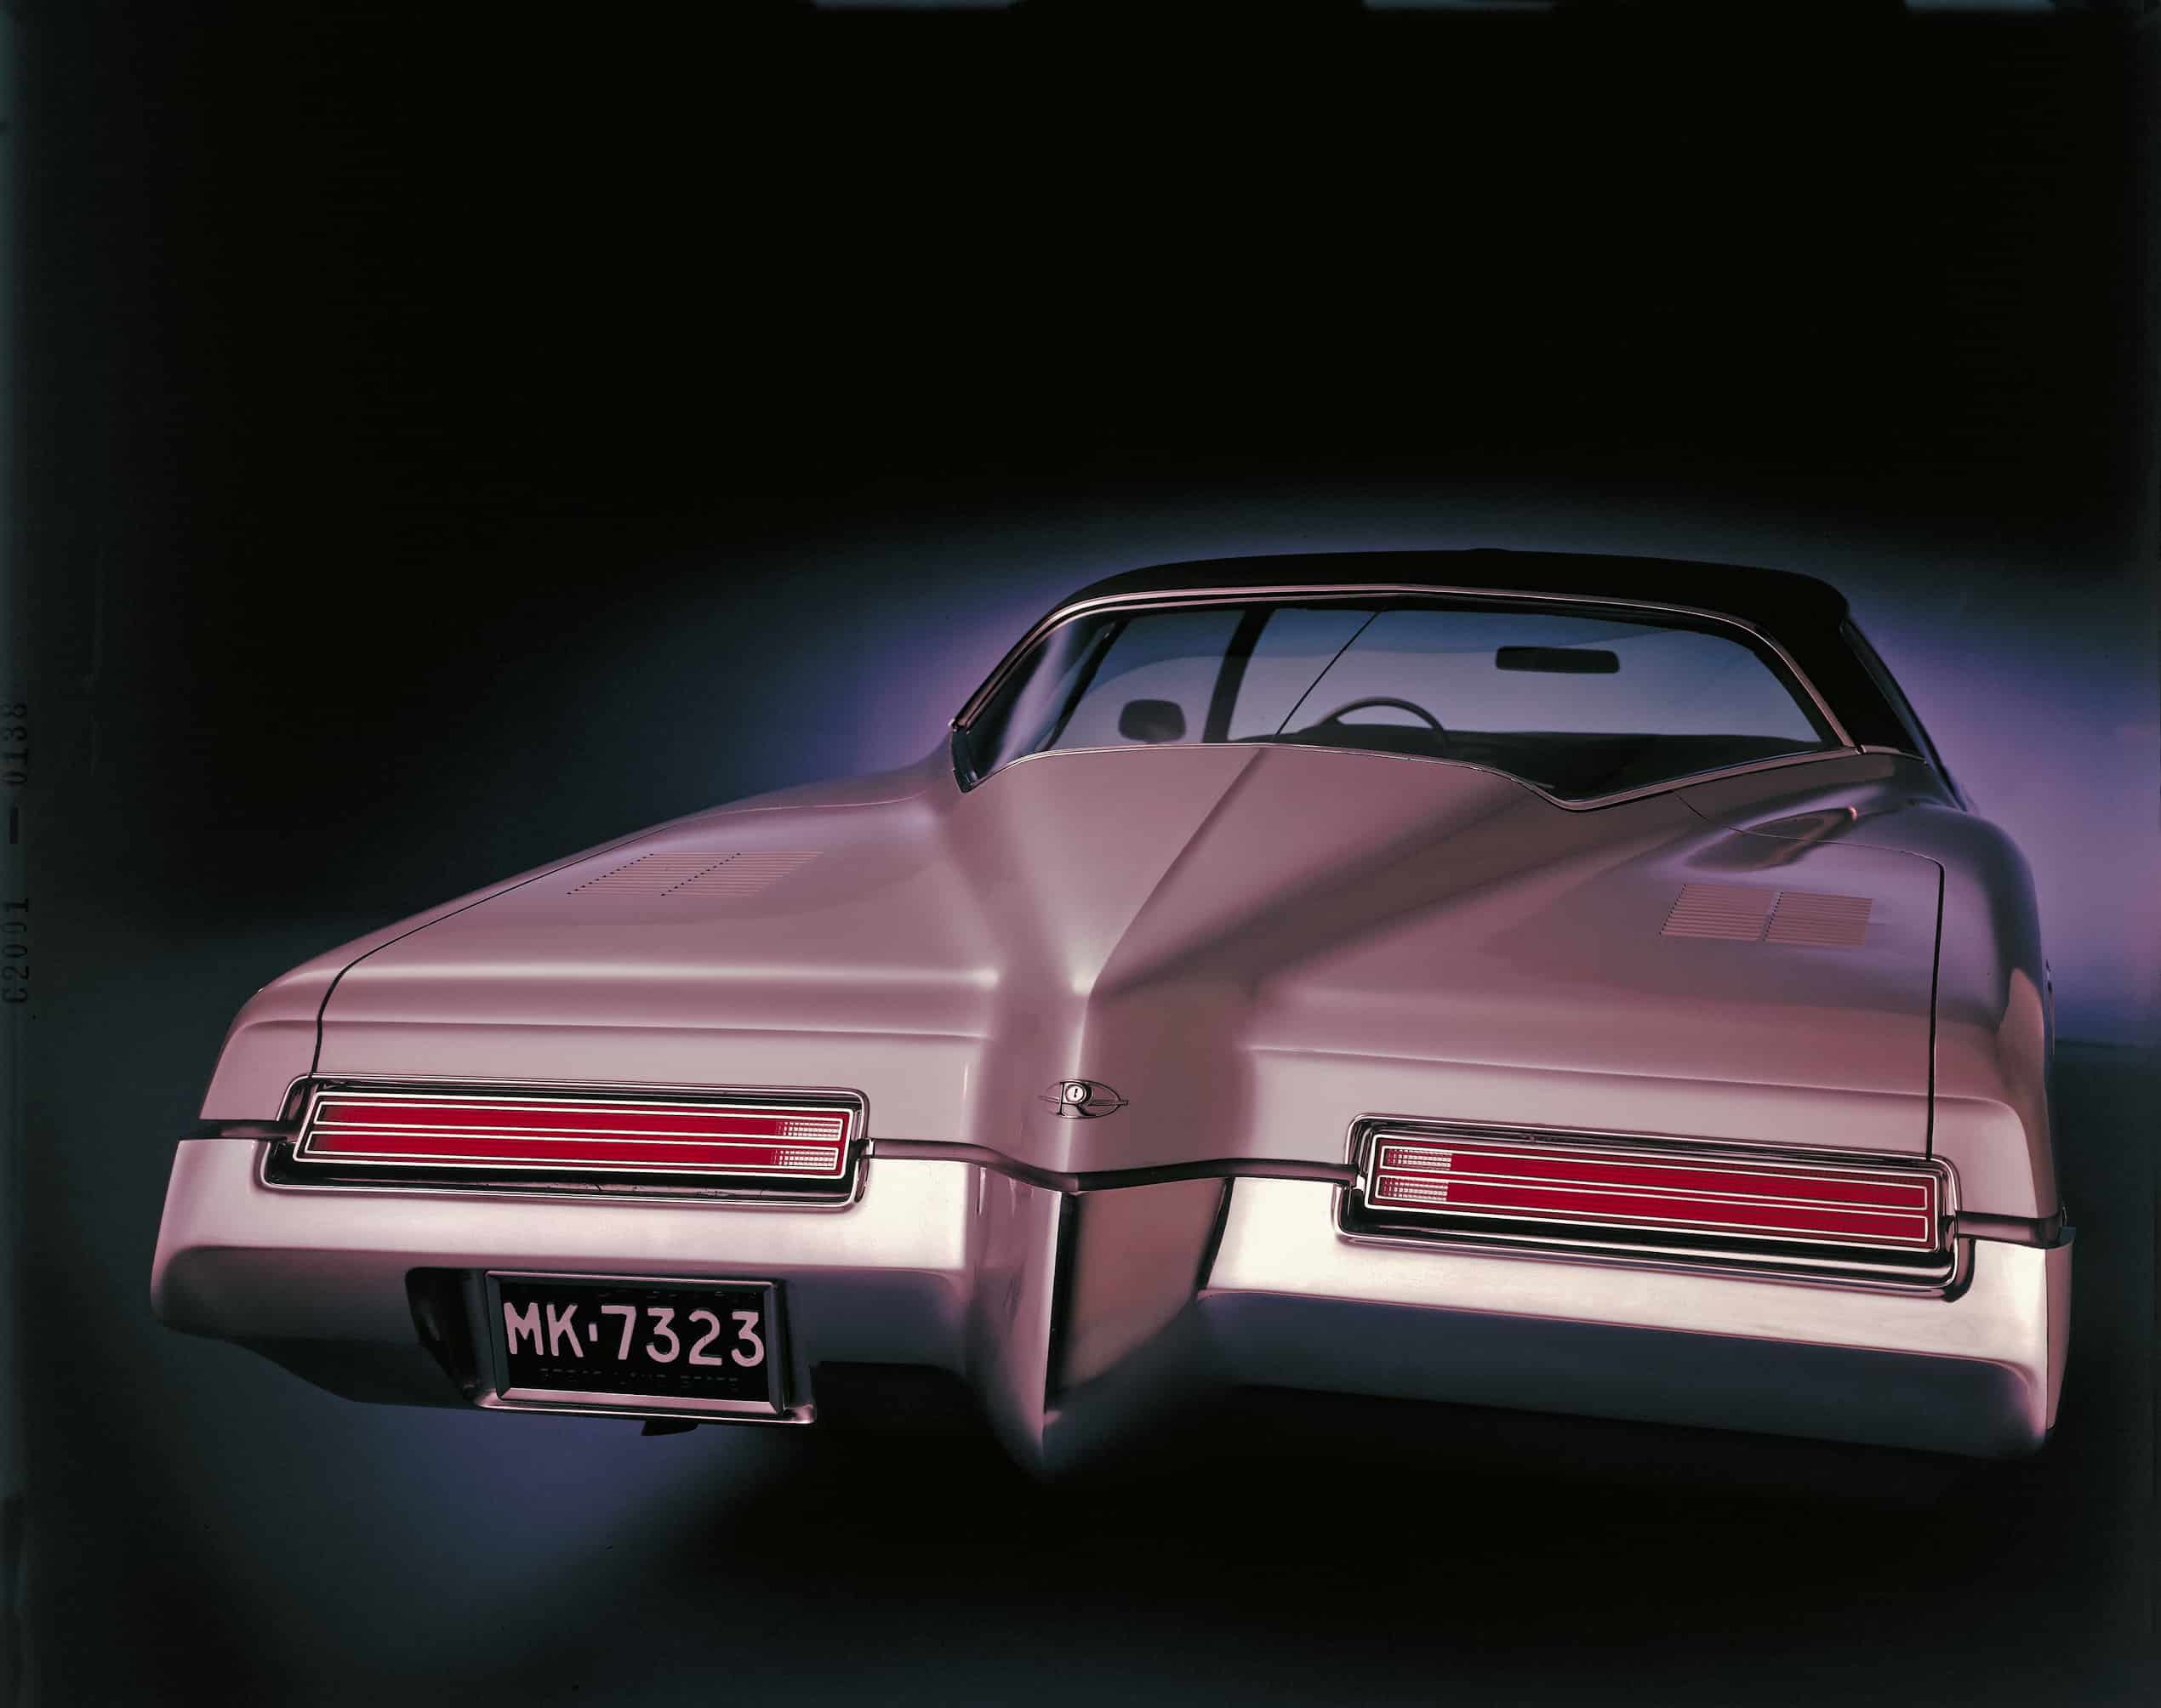 1971 Buick Riviera Coupe